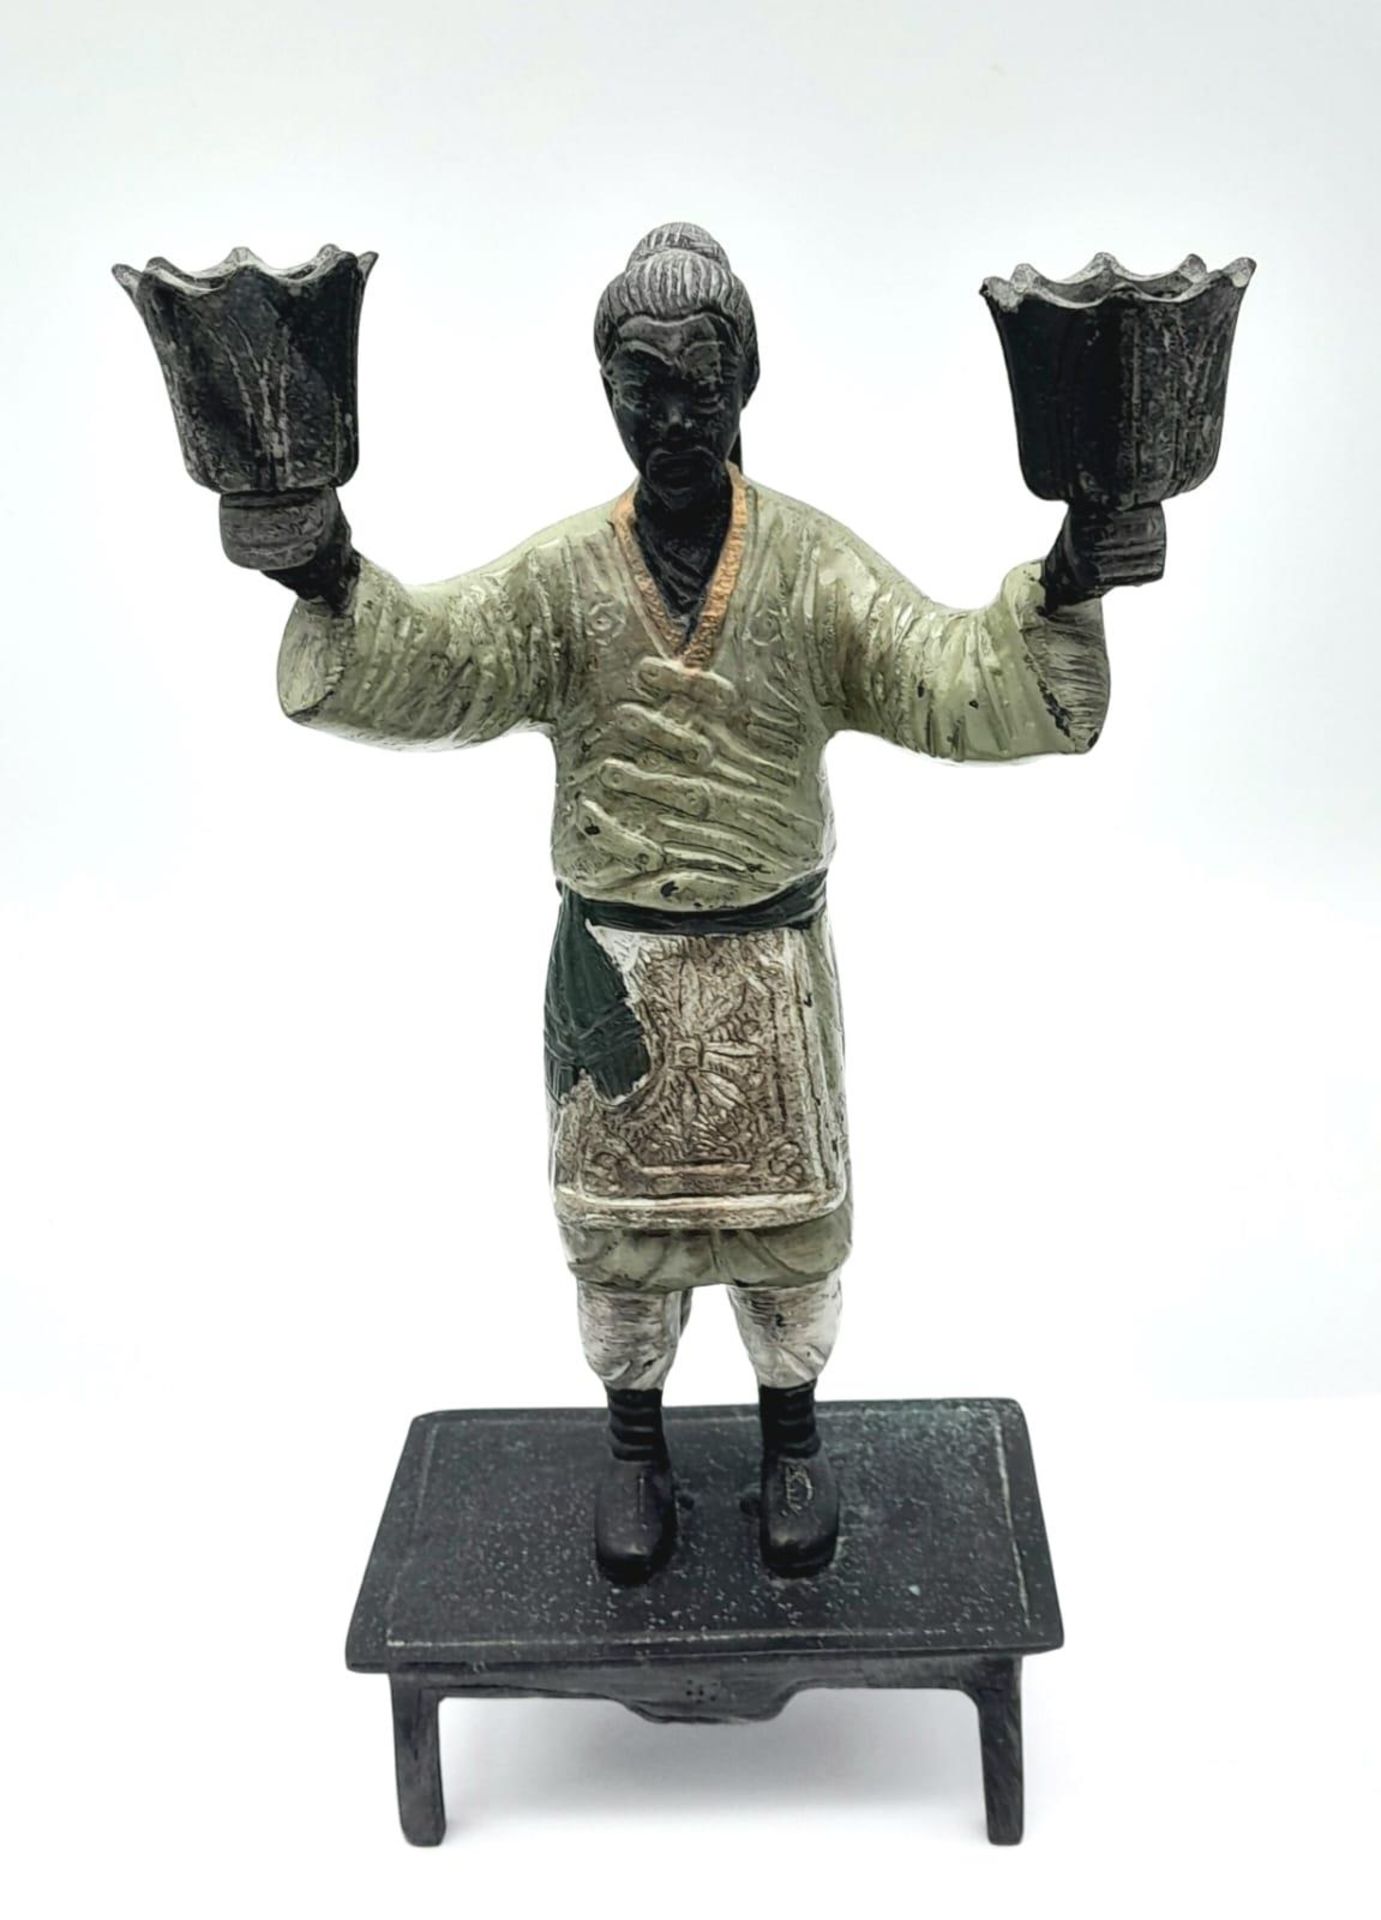 A Vintage Possibly Antique Japanese Bronze Ceremonial Figure. 24cm tall.